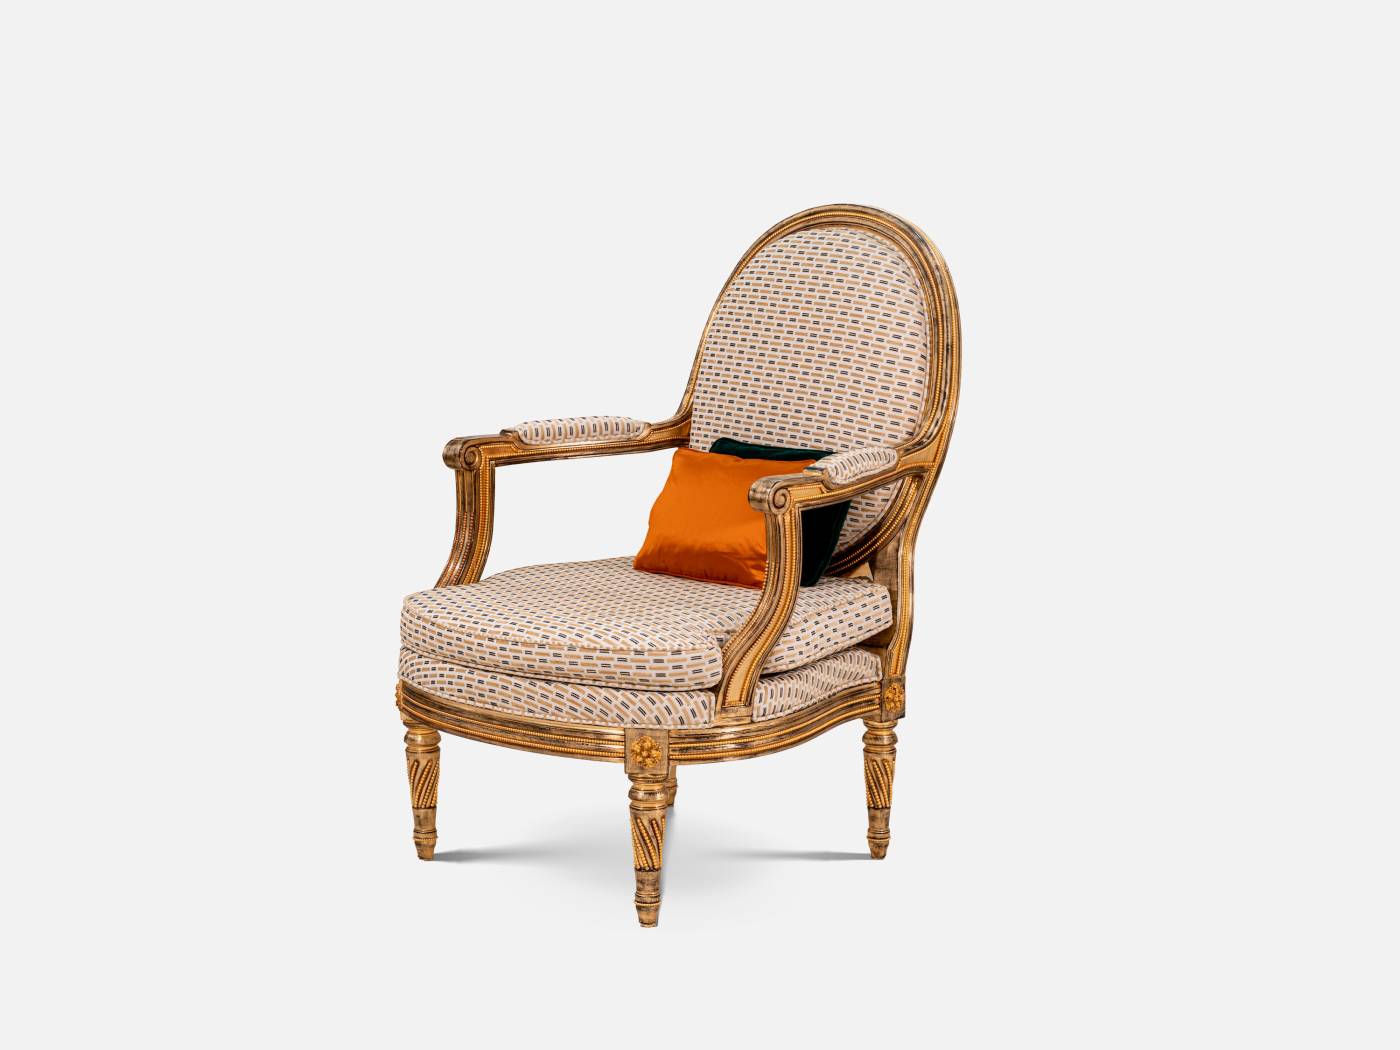 ART. 2315 – The elegance of luxury classic Armchairs made in Italy by C.G. Capelletti.